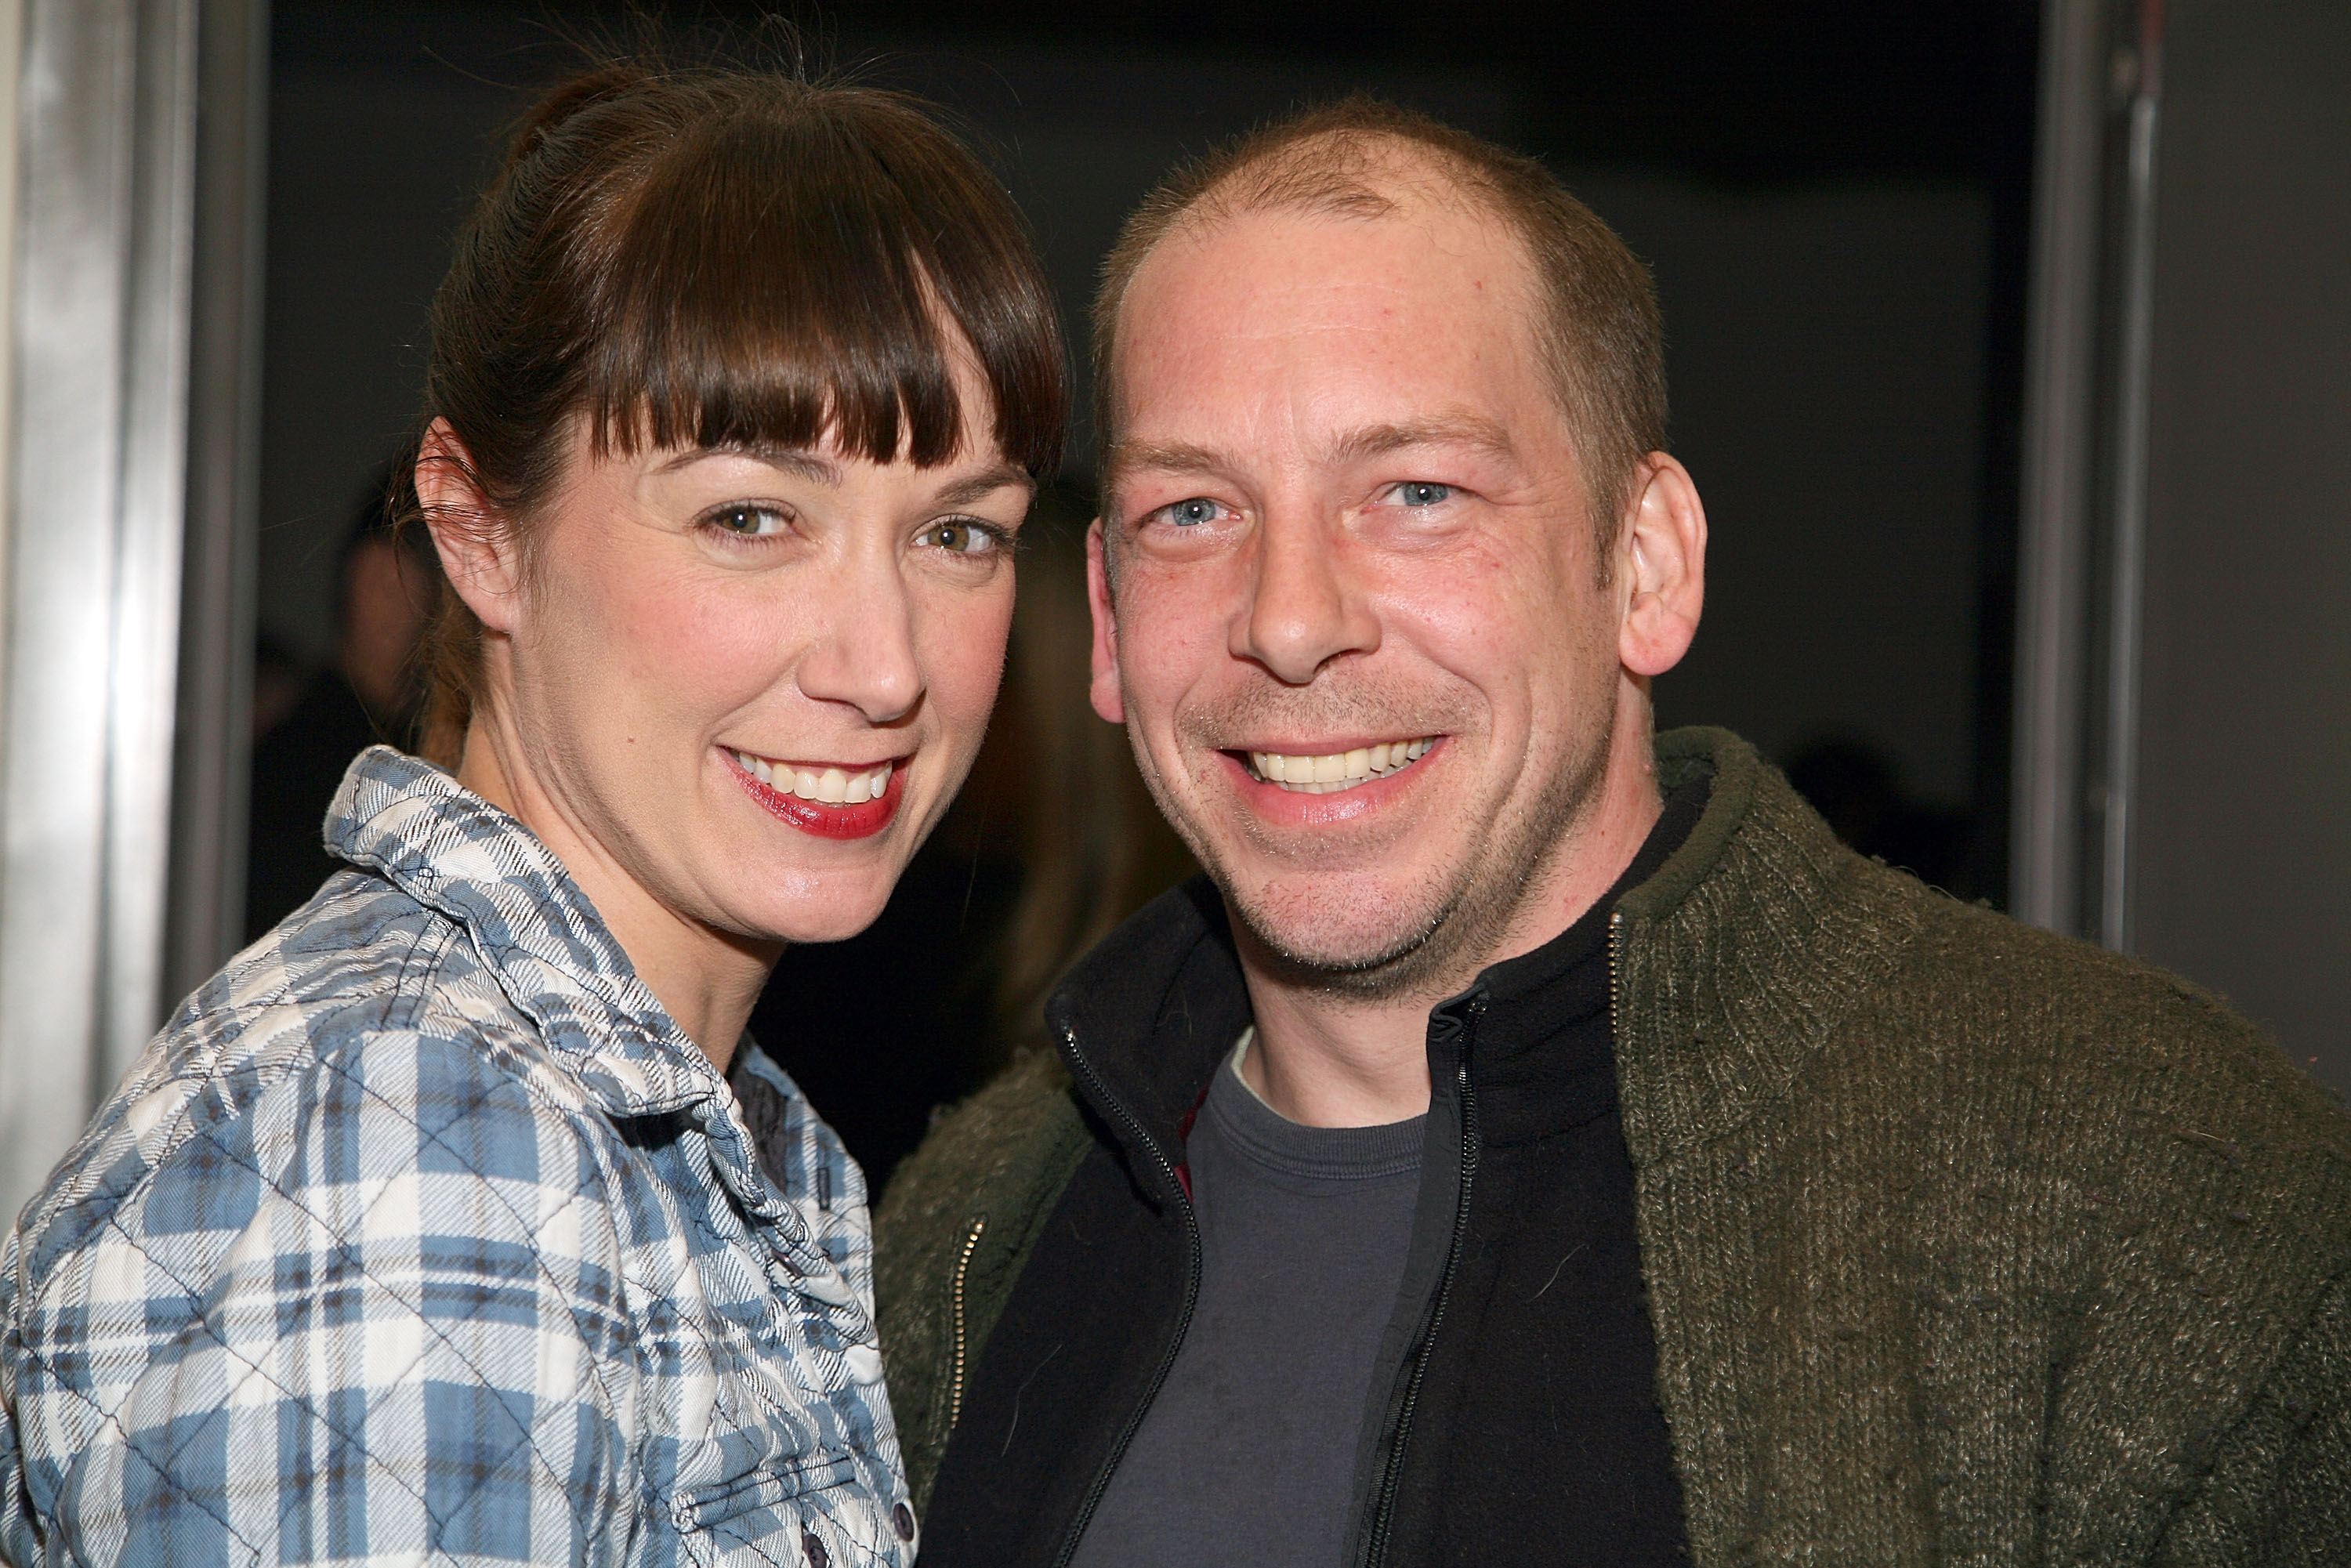 Elizabeth Marvel and Bill Camp at the opening night of the play "Almost An Evening" on January 22, 2008 in New York City.  | Source: Getty Images